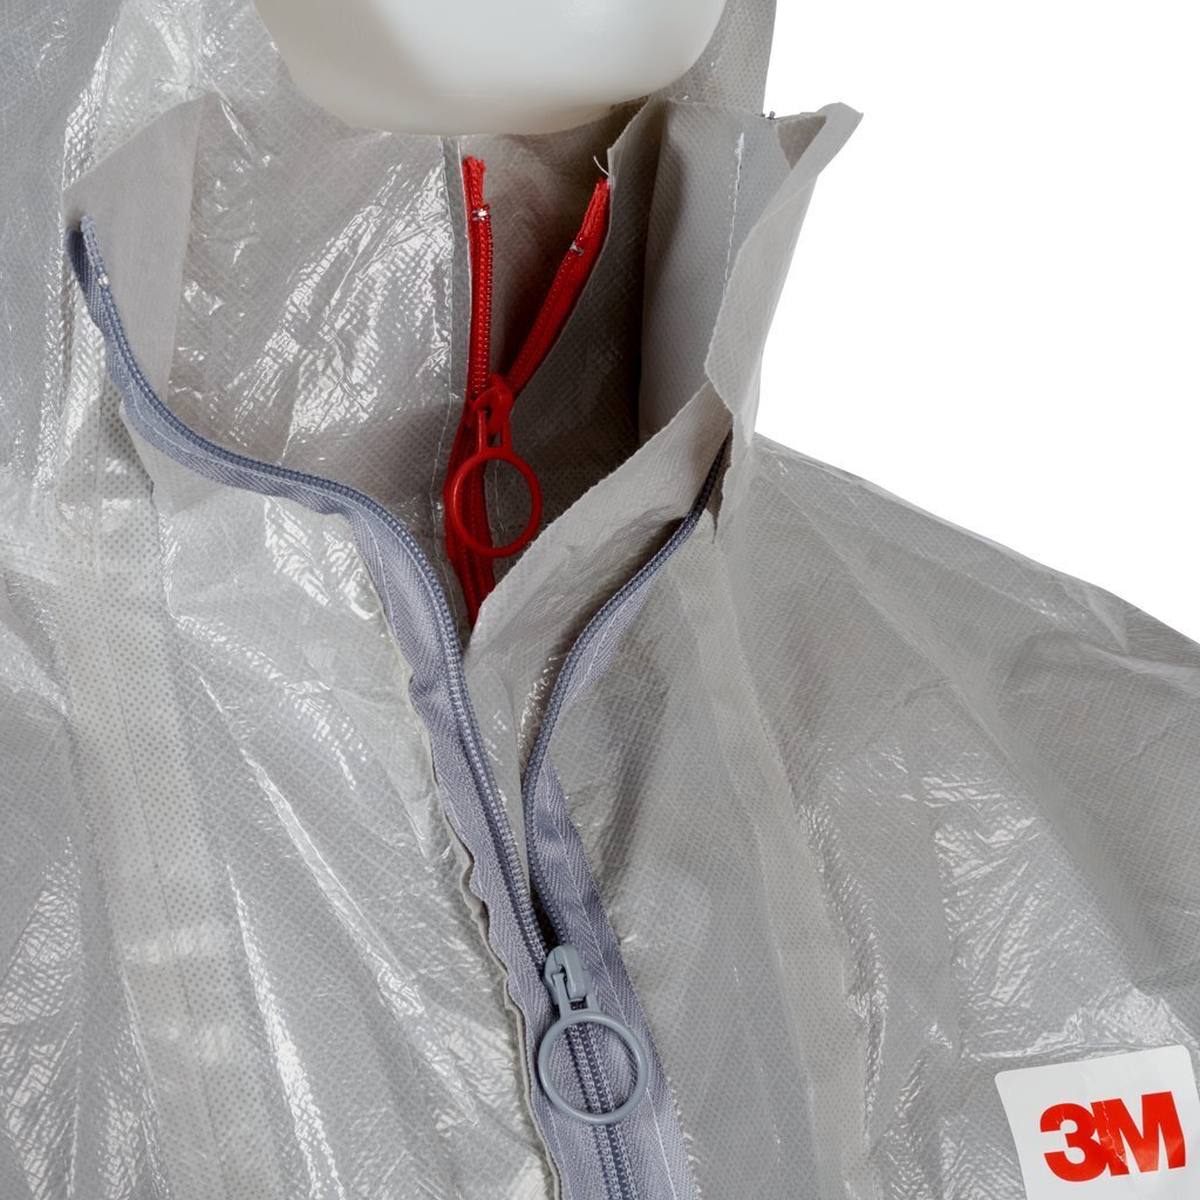 3M 4570 coverall, gray, type 3/4/5/6, size M, extremely robust, sealed seams, double zipper, light and supple material, size M